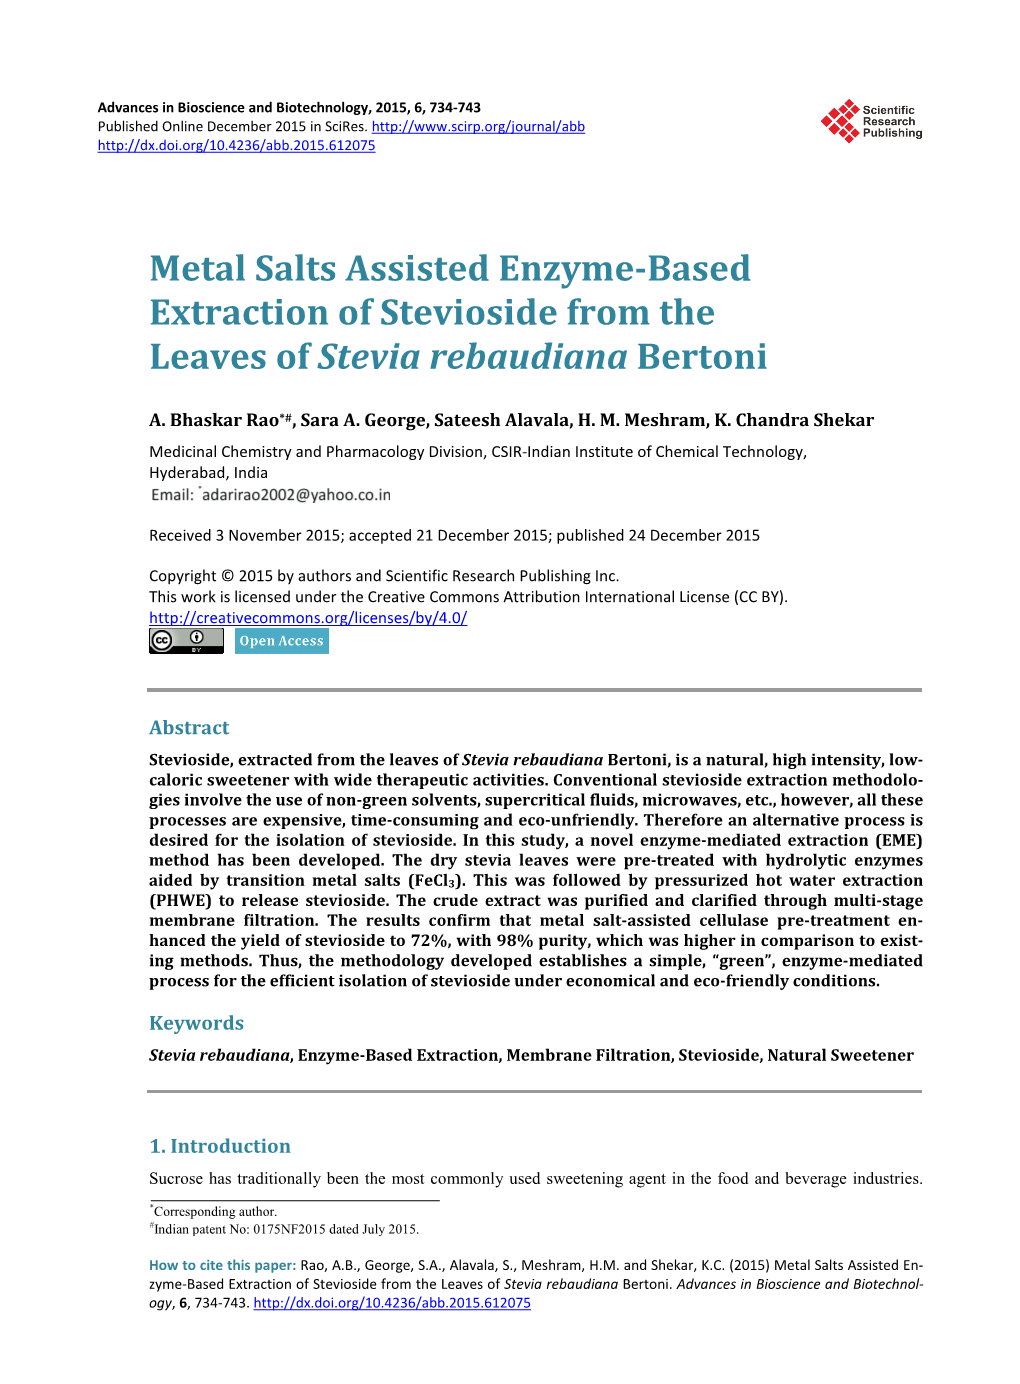 Metal Salts Assisted Enzyme-Based Extraction of Stevioside from the Leaves of Stevia Rebaudiana Bertoni